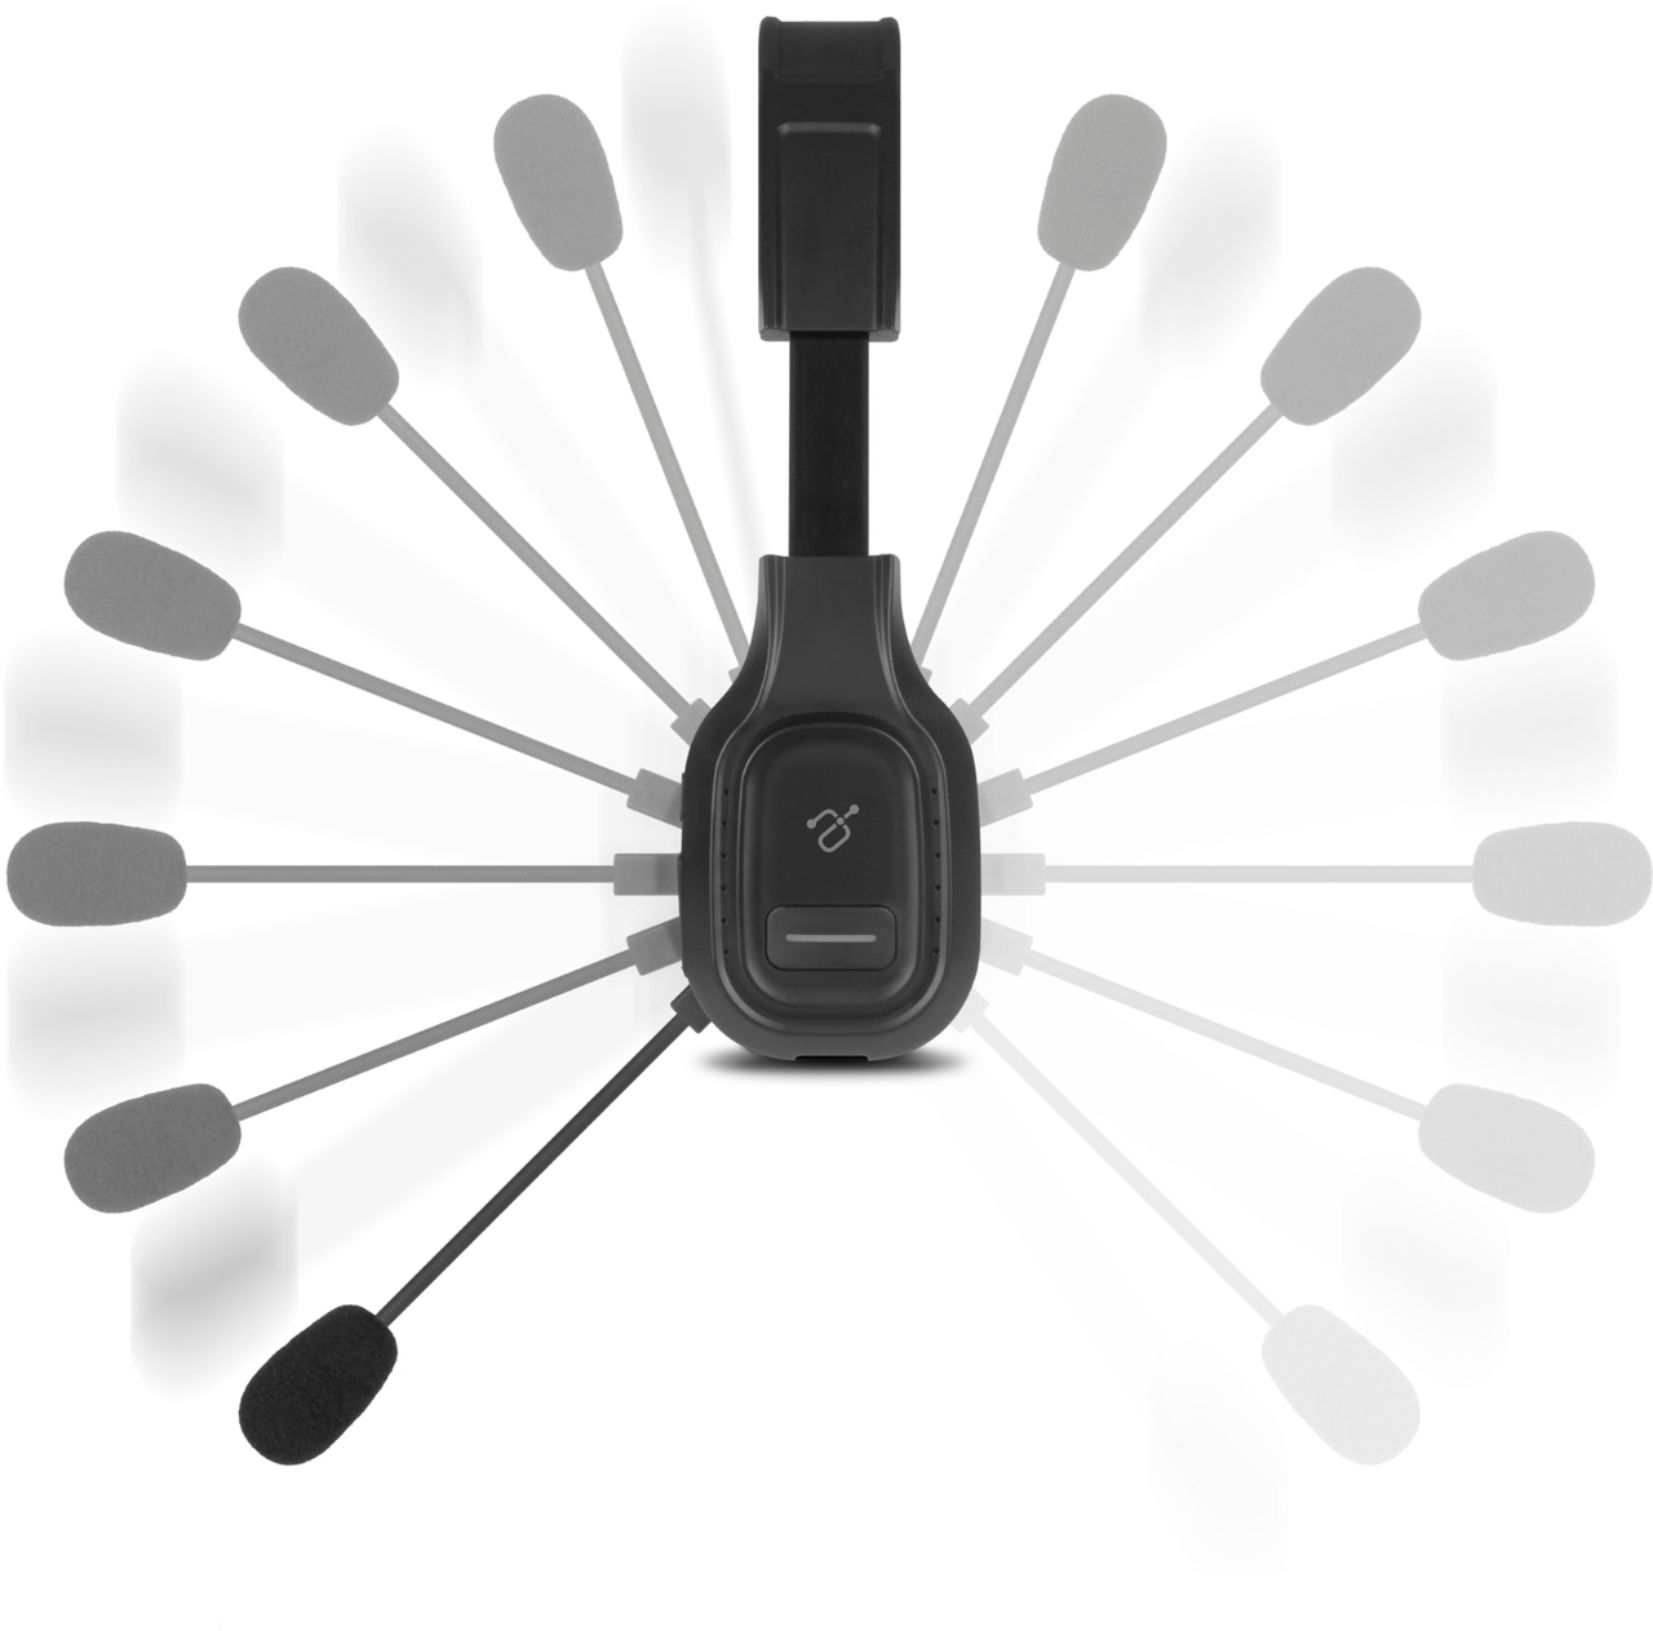 Left View: Aluratek - Wireless Bluetooth Headset with Boom Mic for video conference and chat - Black